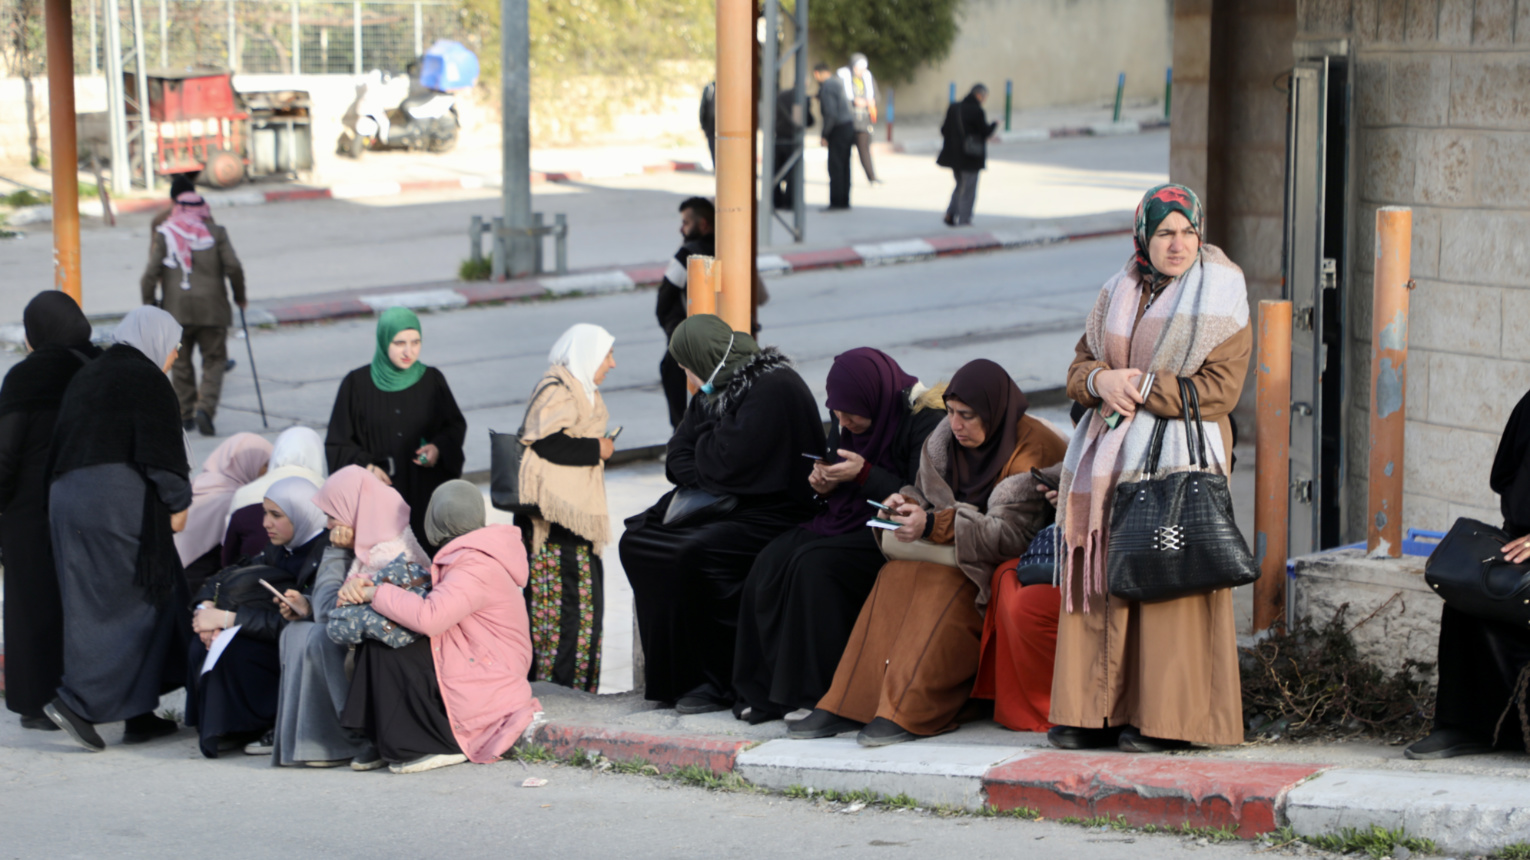 Women wait in Bethlehem, hoping to be granted access to Al-Aqsa Mosque (Mosab Shawer/MEE).